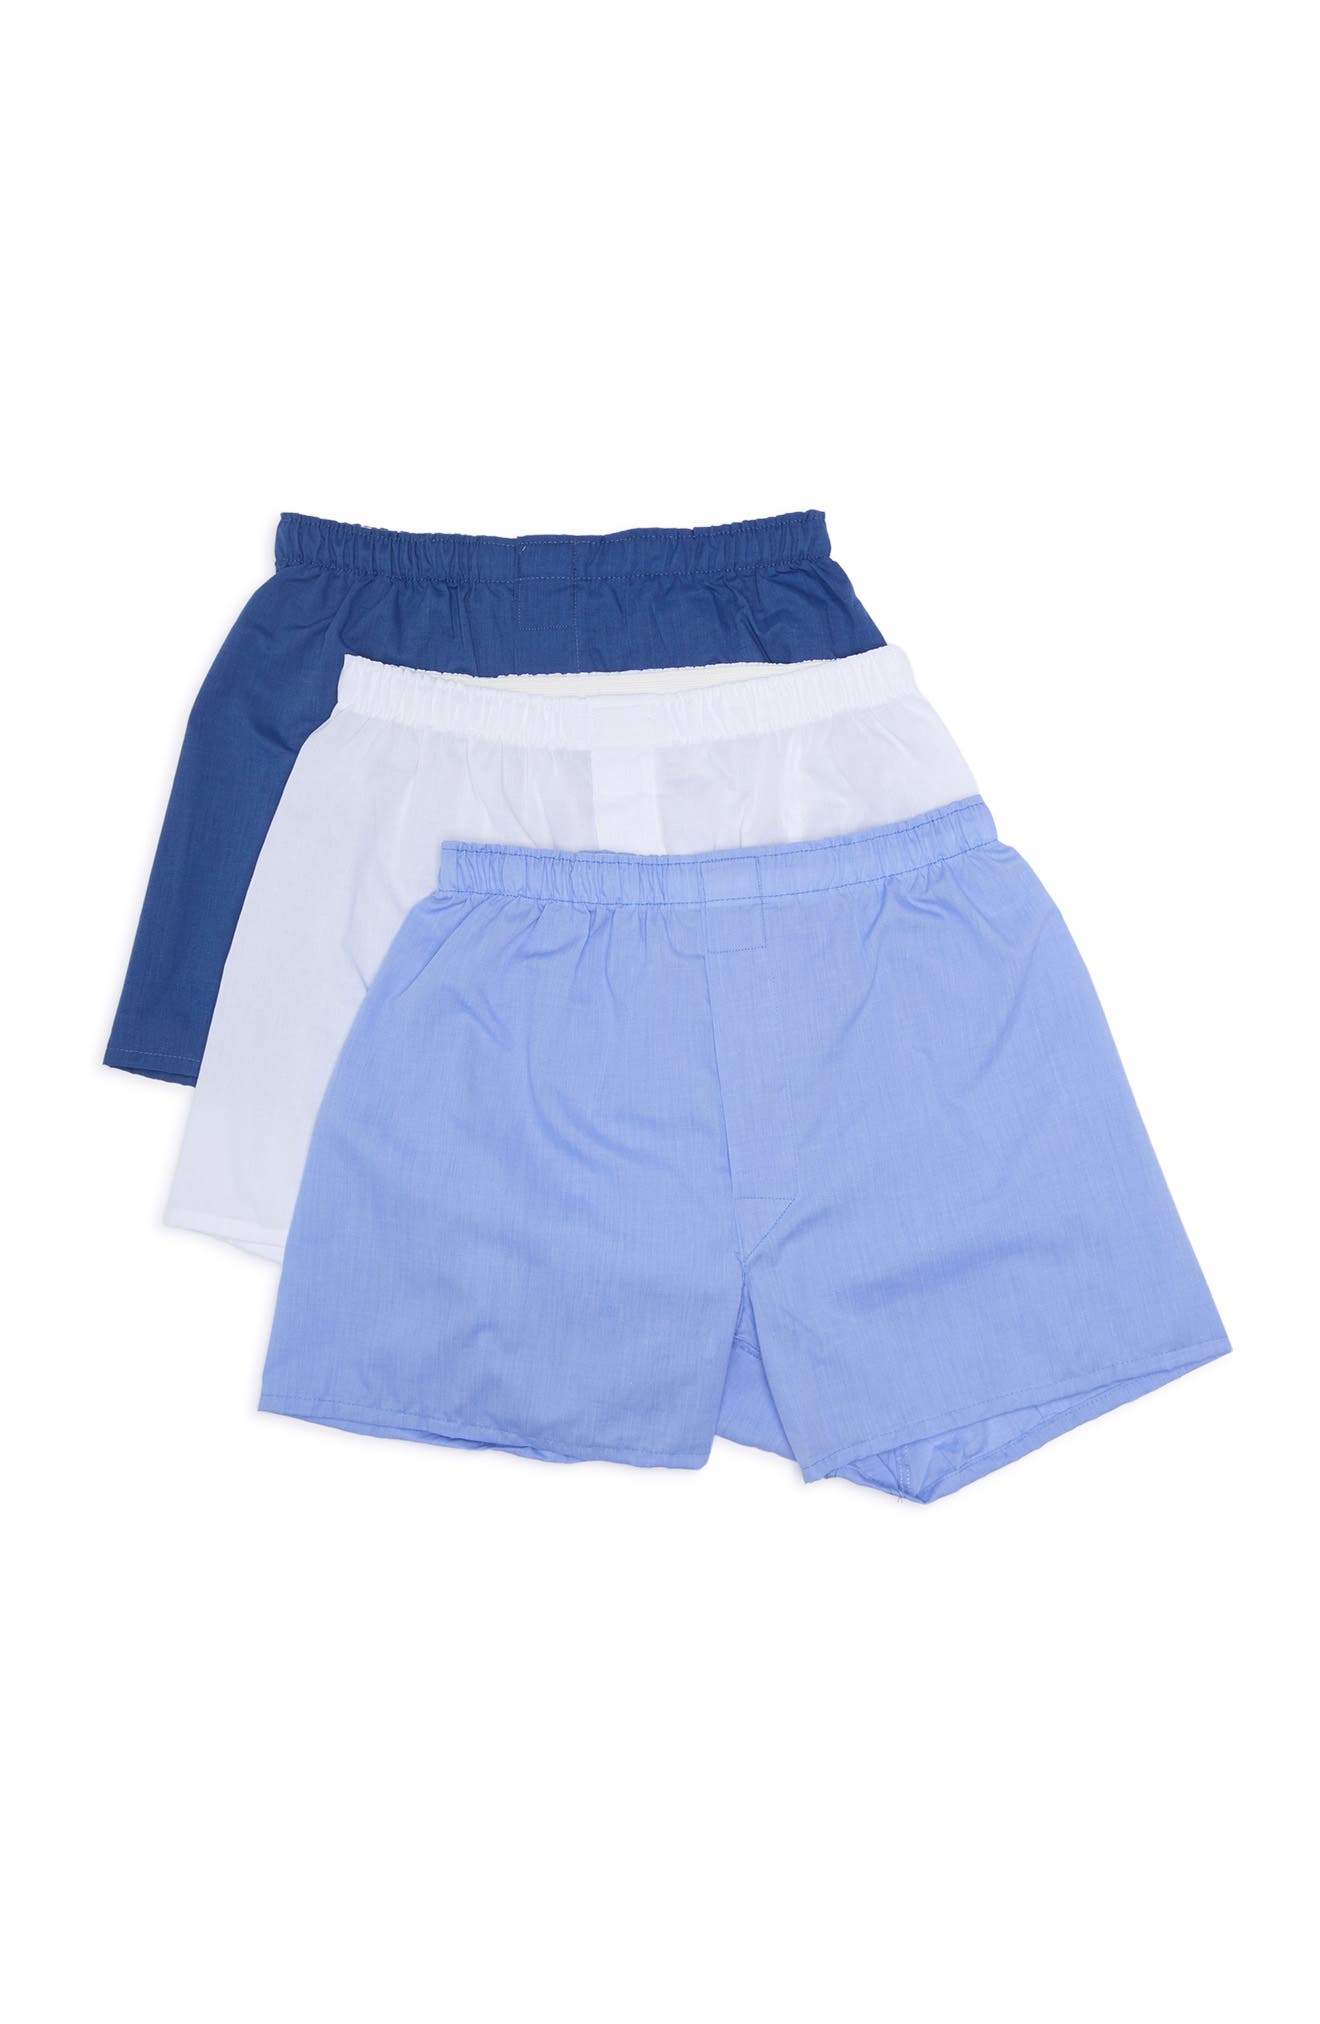 Nordstrom Woven Boxer In Blue White Solid Pack | ModeSens